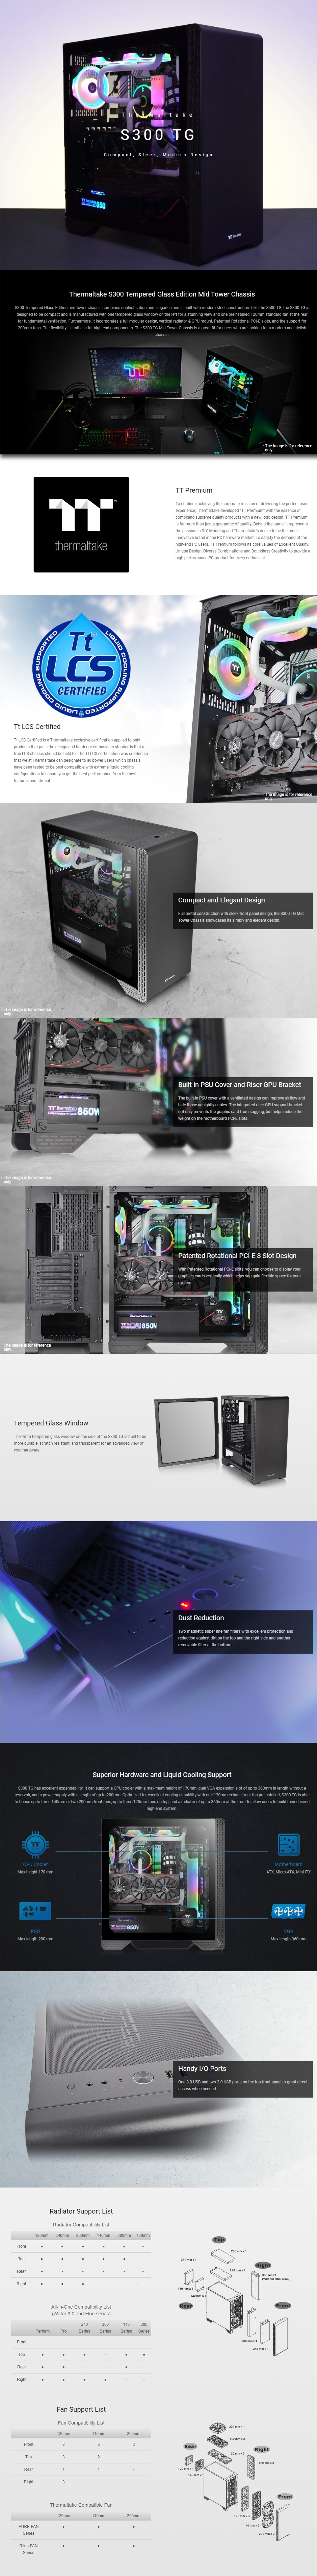 A large marketing image providing additional information about the product Thermaltake S300 - Mid Tower Case (Black) - Additional alt info not provided